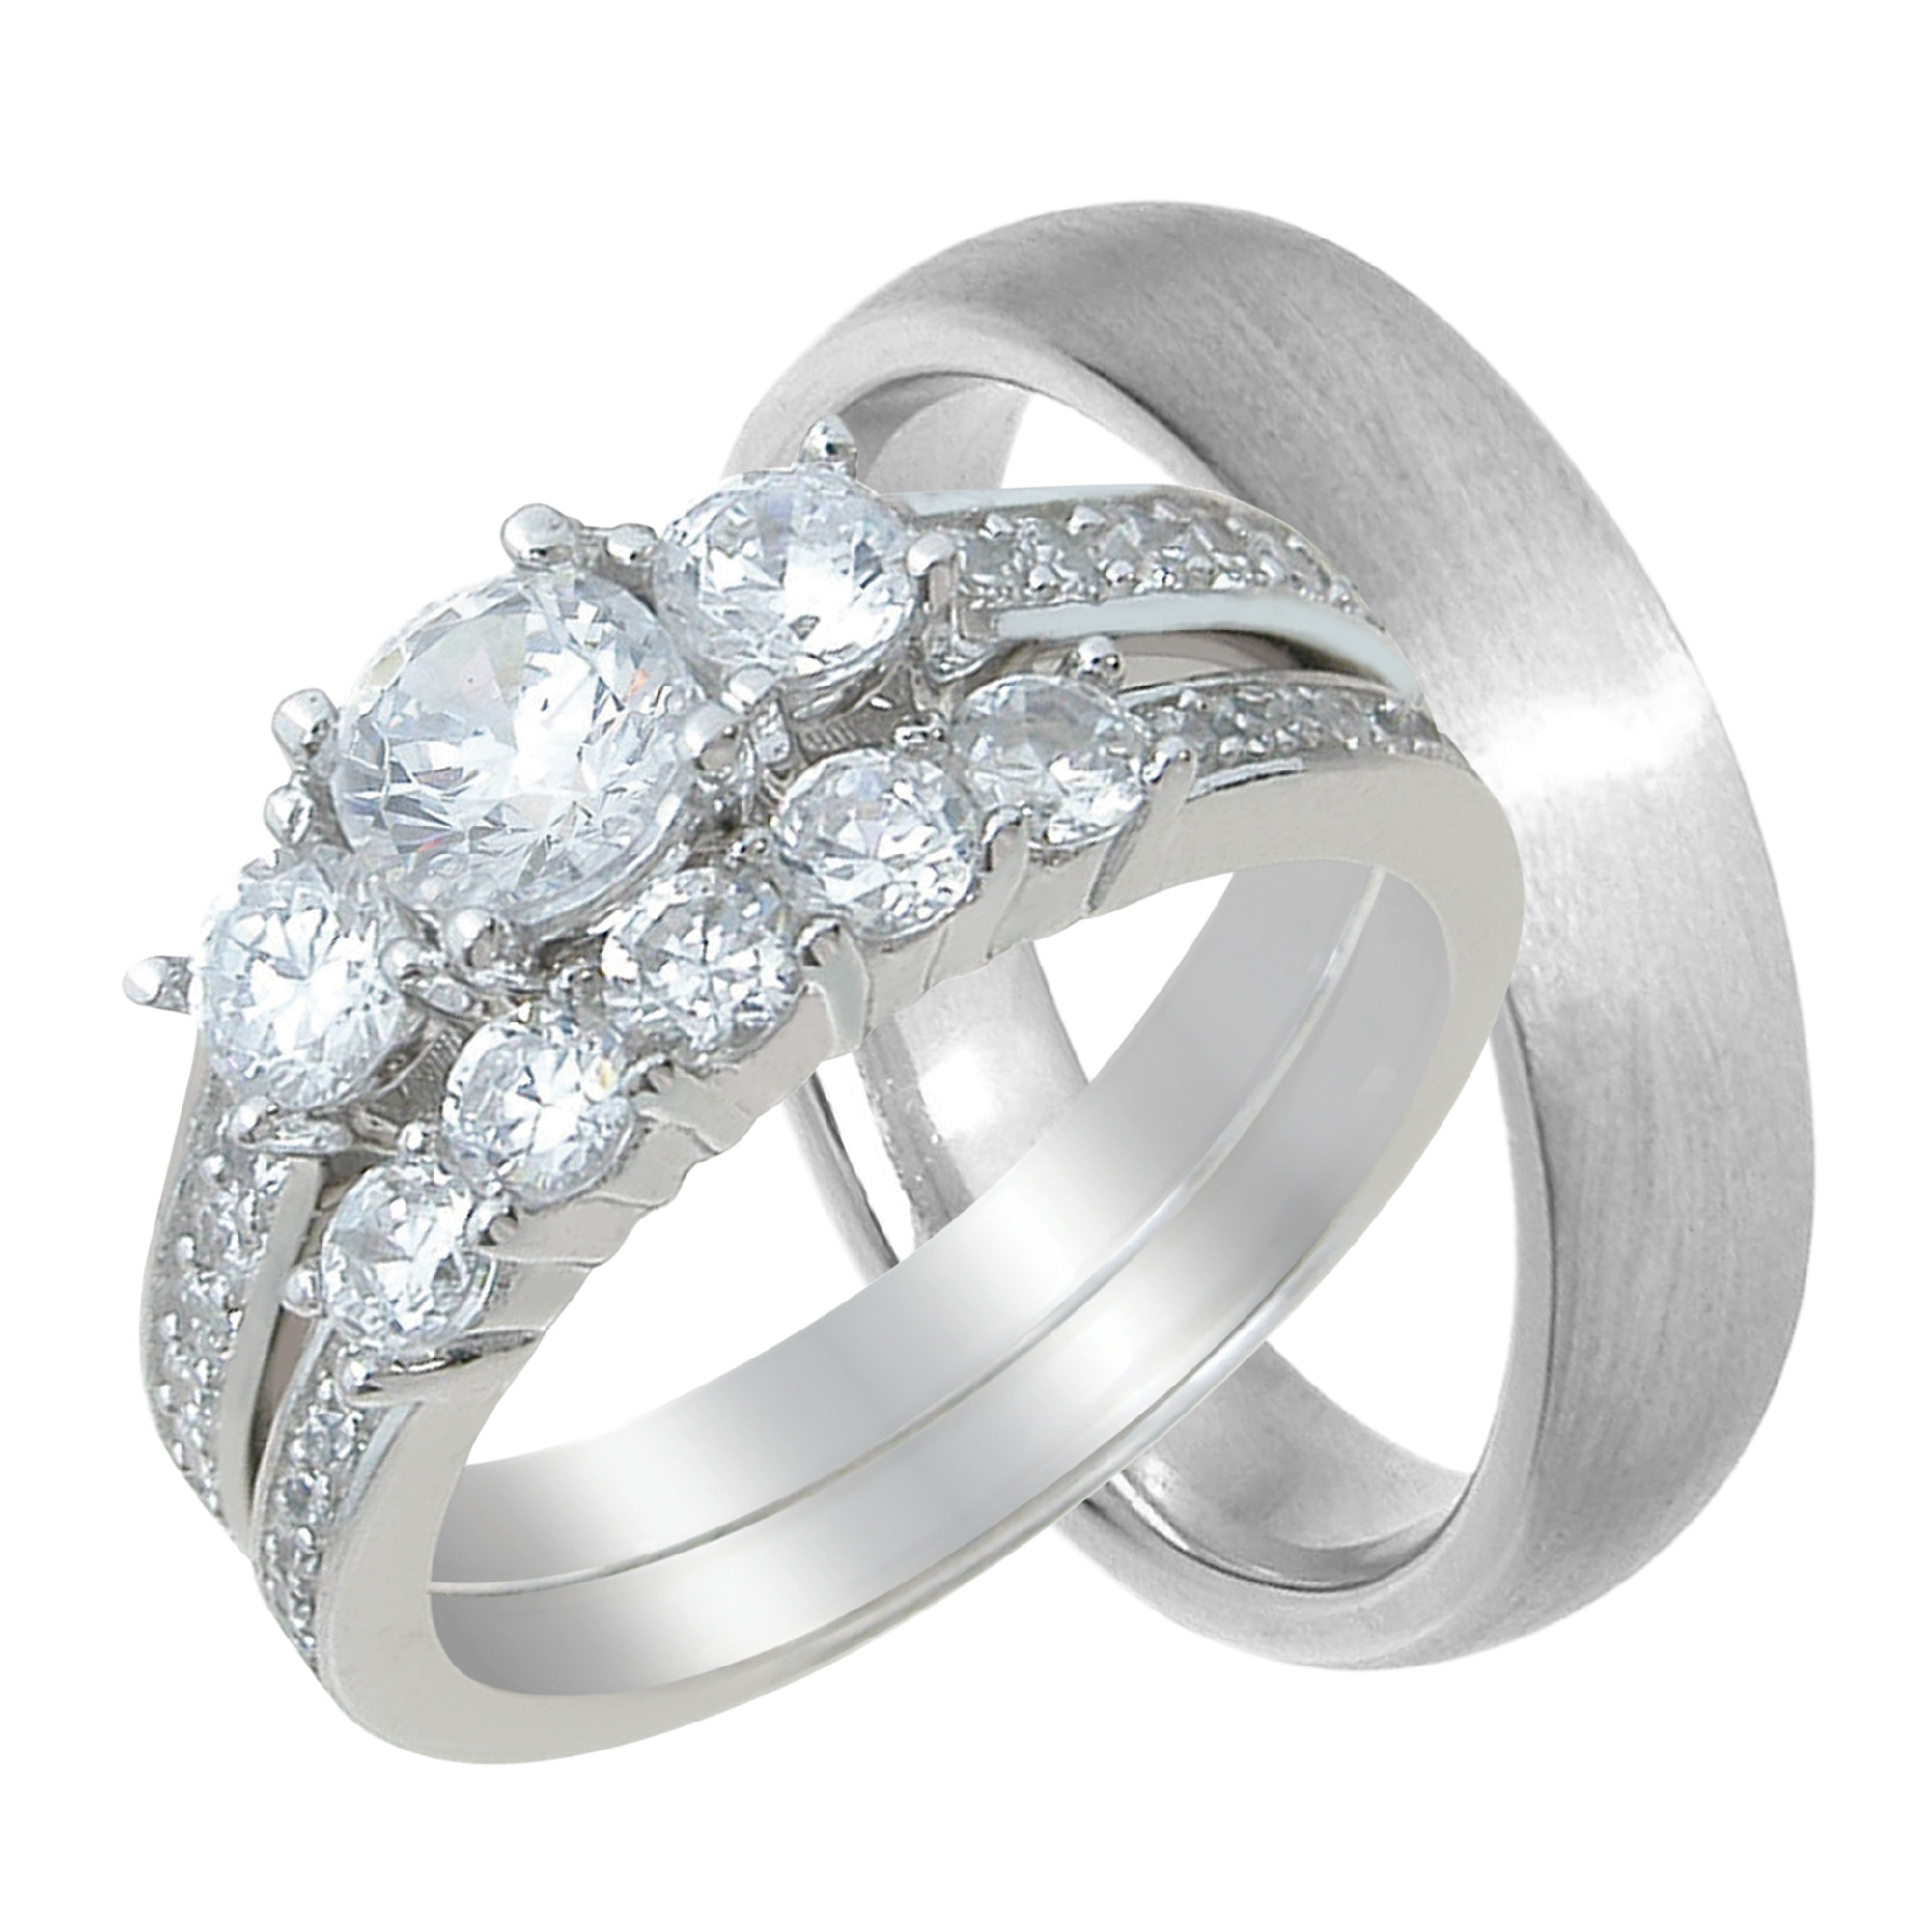 Cheap Wedding Band Sets His And Hers
 LaRaso & Co His and Hers Wedding Ring Set Cheap Wedding